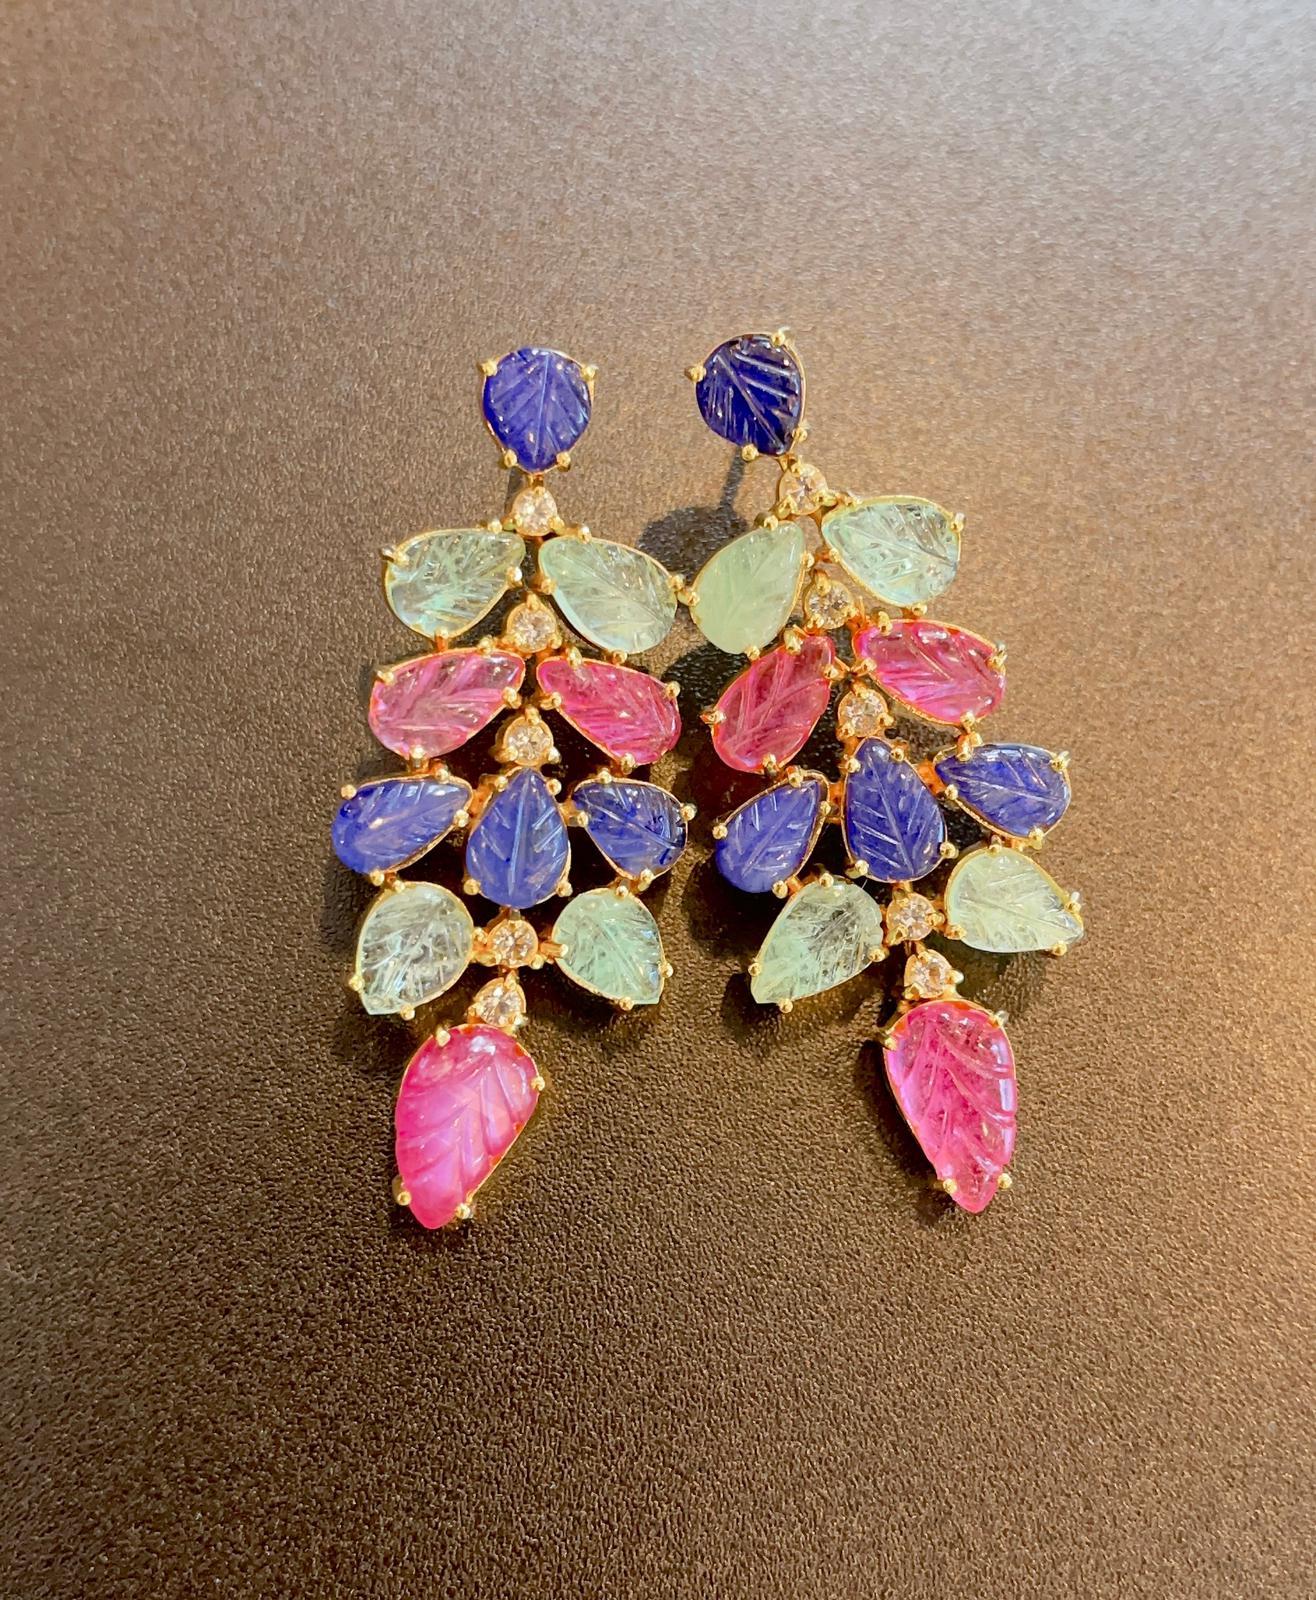 Bochic “Capri” Sapphire, Ruby and Emerald Earrings 
Natural Carved Ruby - 9 carats 
Natural Carved Sri Lankan Sapphire - 8 carats
Natural Carved Zambian Emerald - 7 - carats 
Natural White Topaz - 1 carat 
The earrings are fancy colors and light,